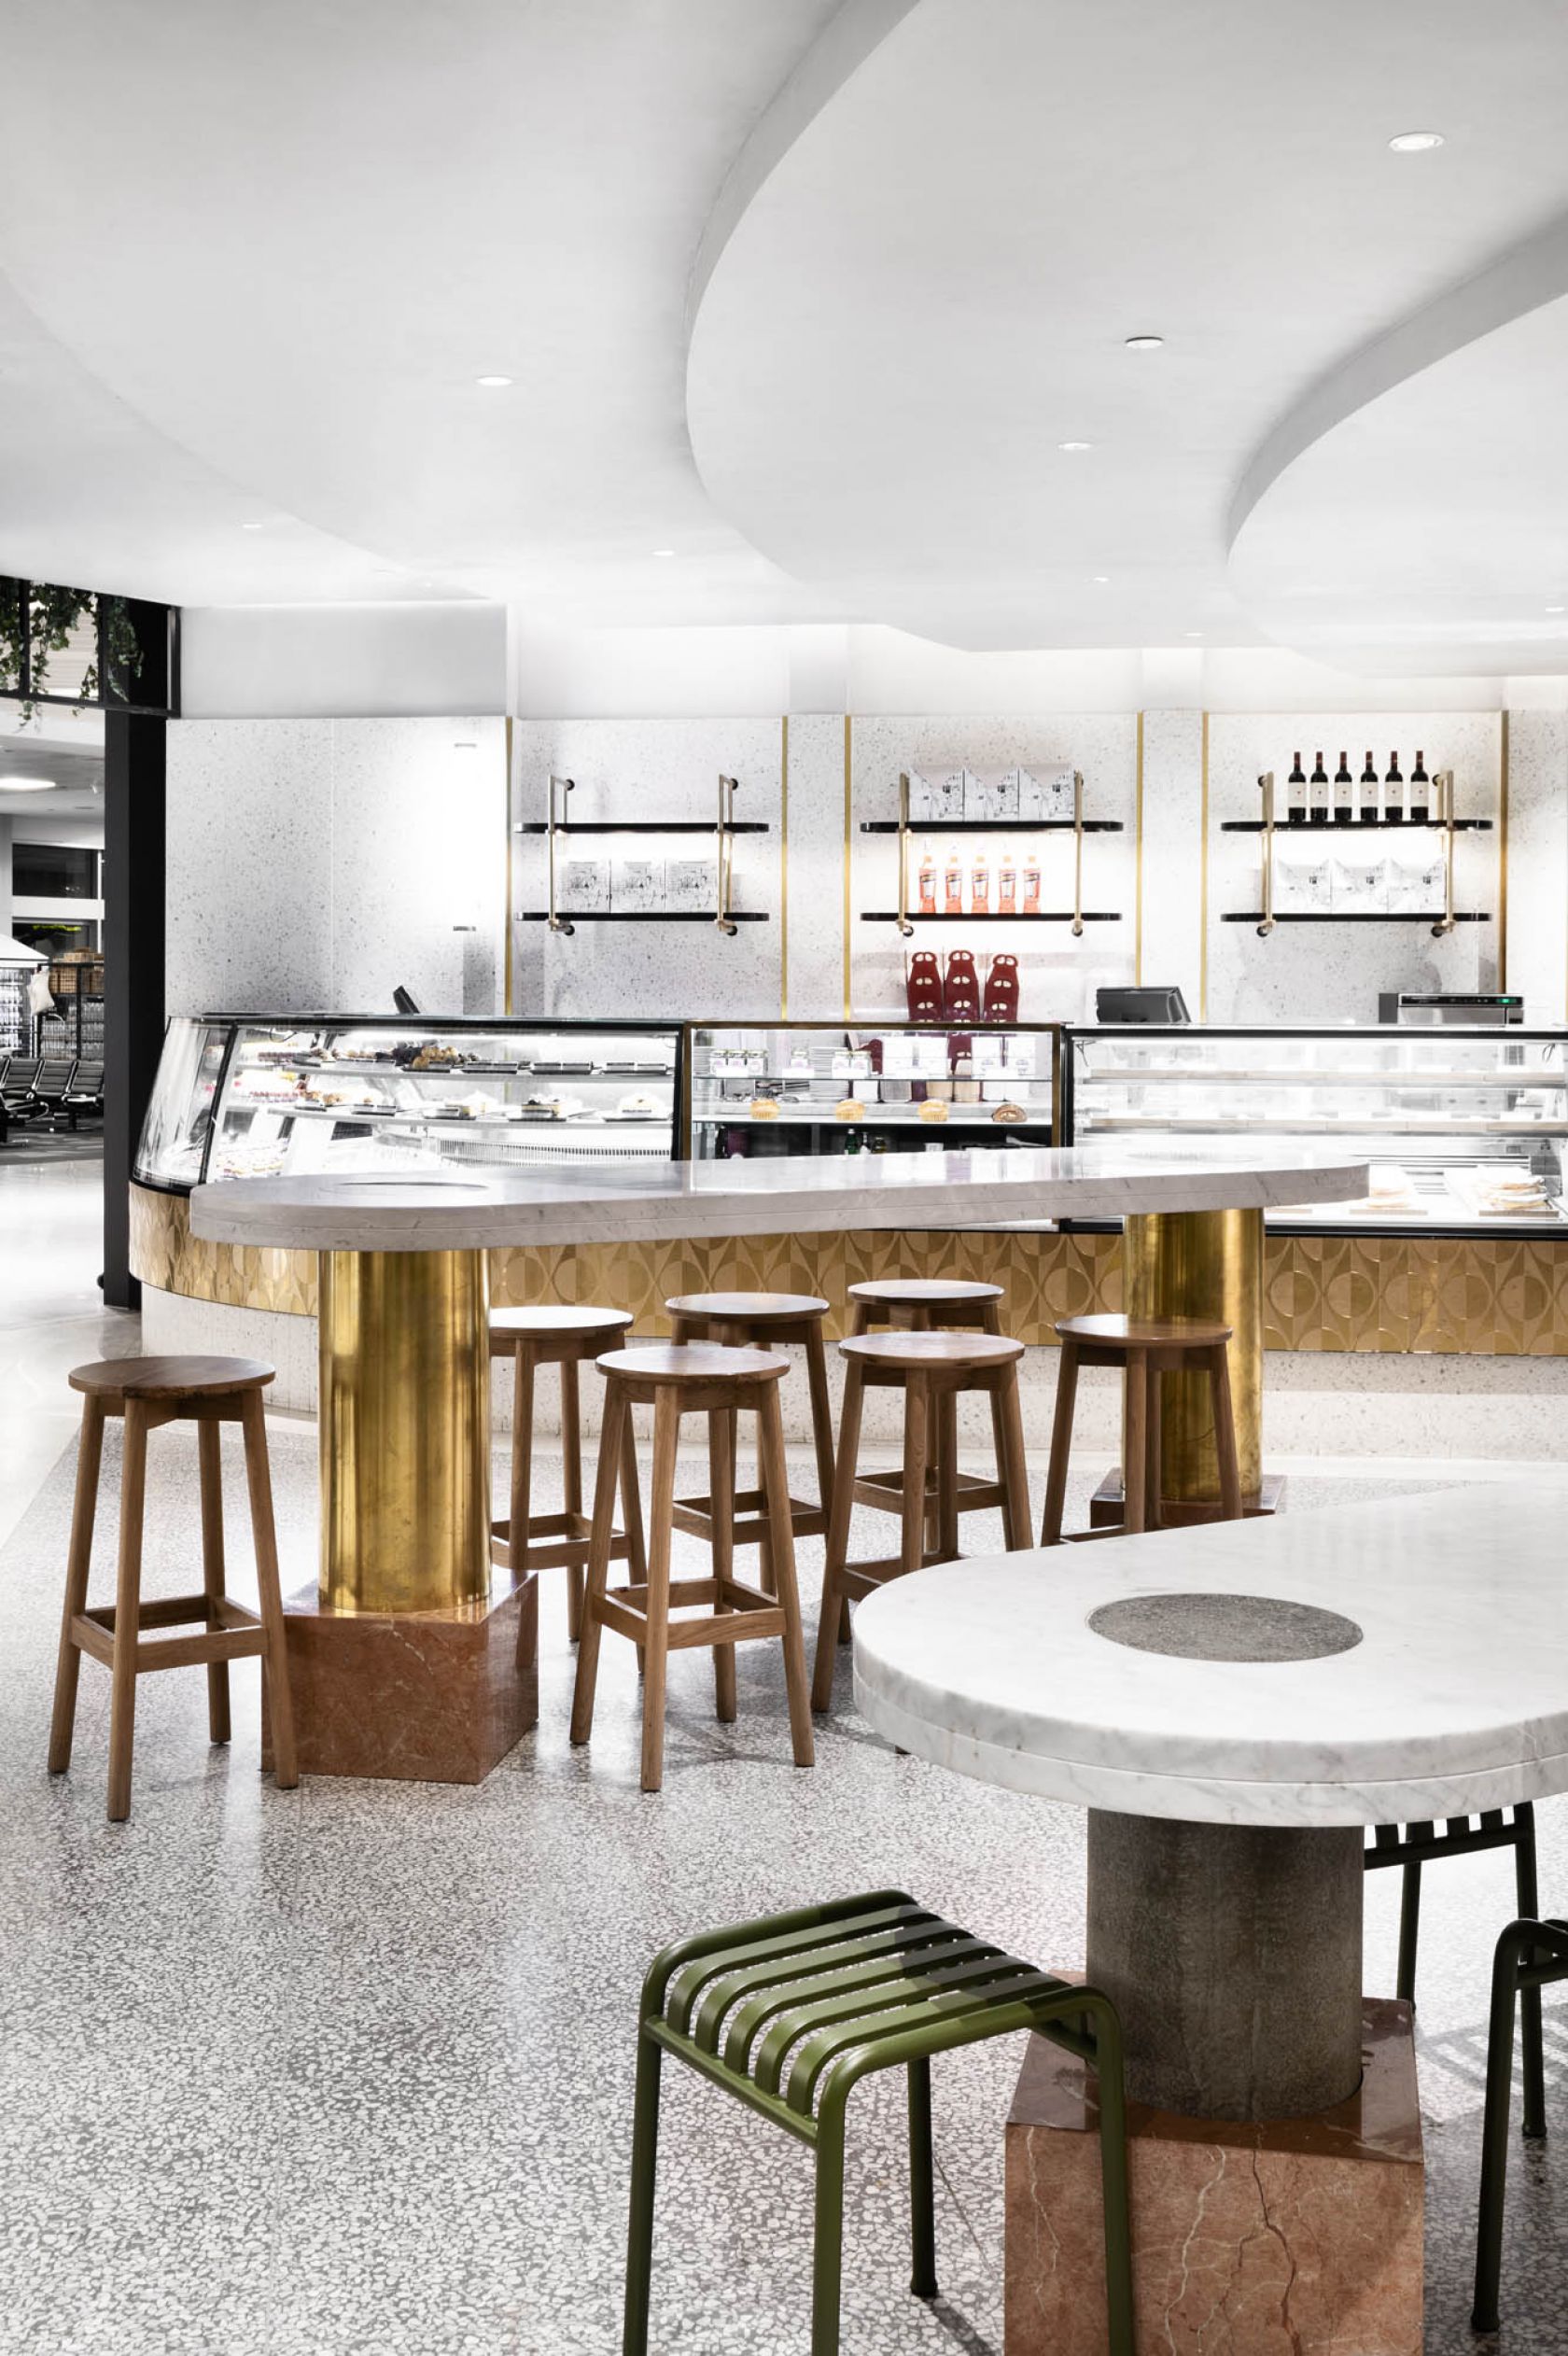 brunetti t2 hospitality interior fitout vic melbourne airport stools tables gold marble benchtop cake dessert display